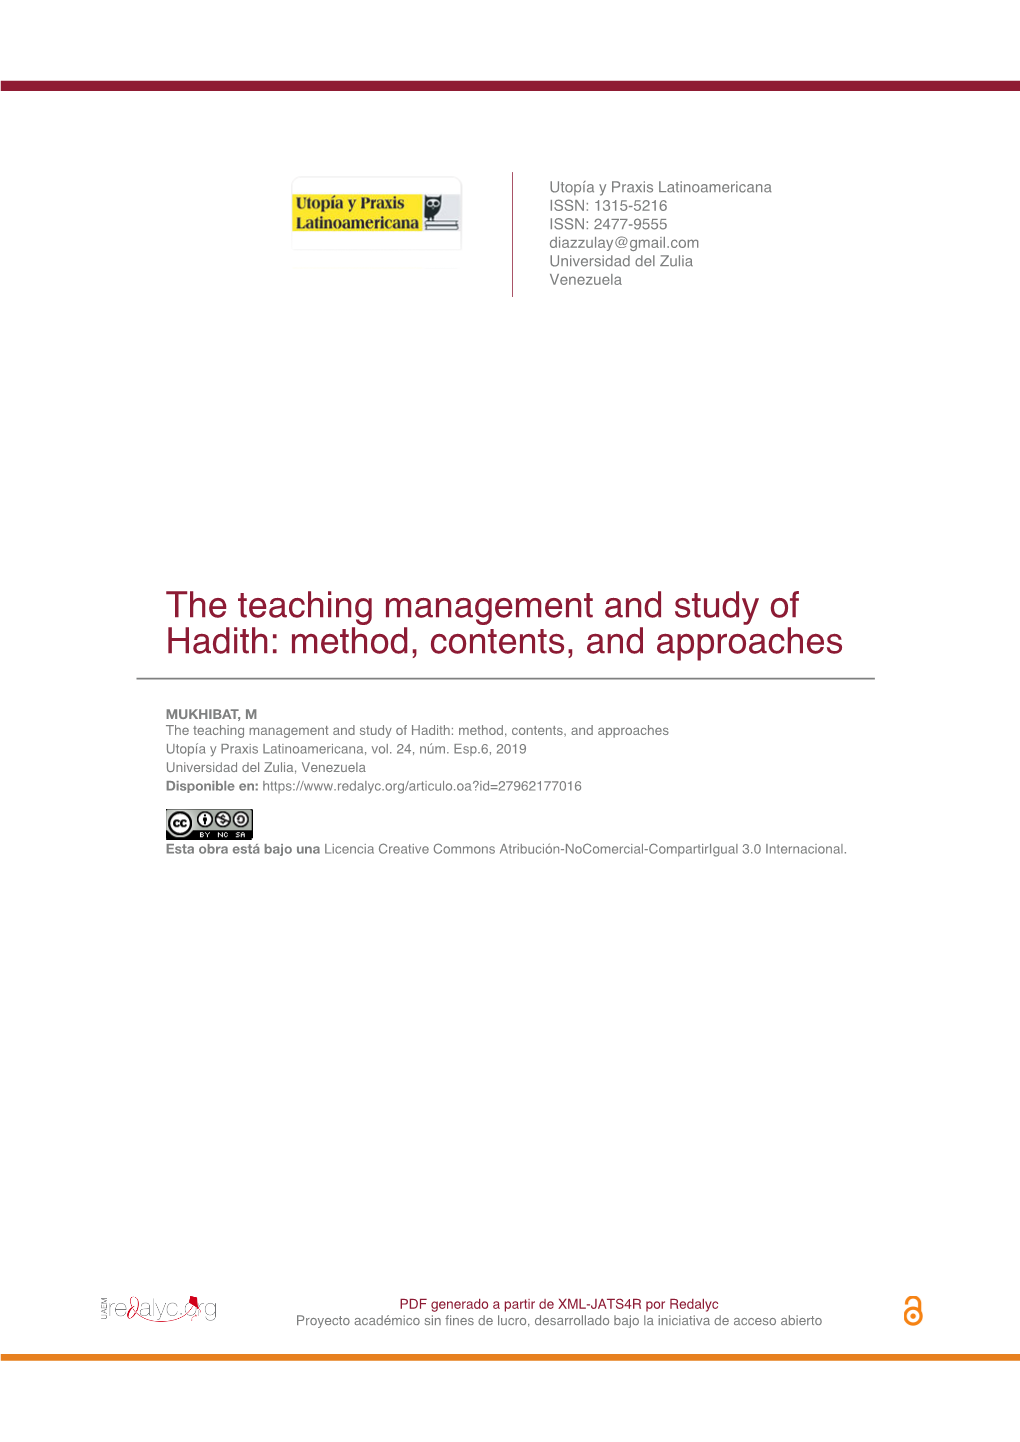 The Teaching Management and Study of Hadith: Method, Contents, and Approaches